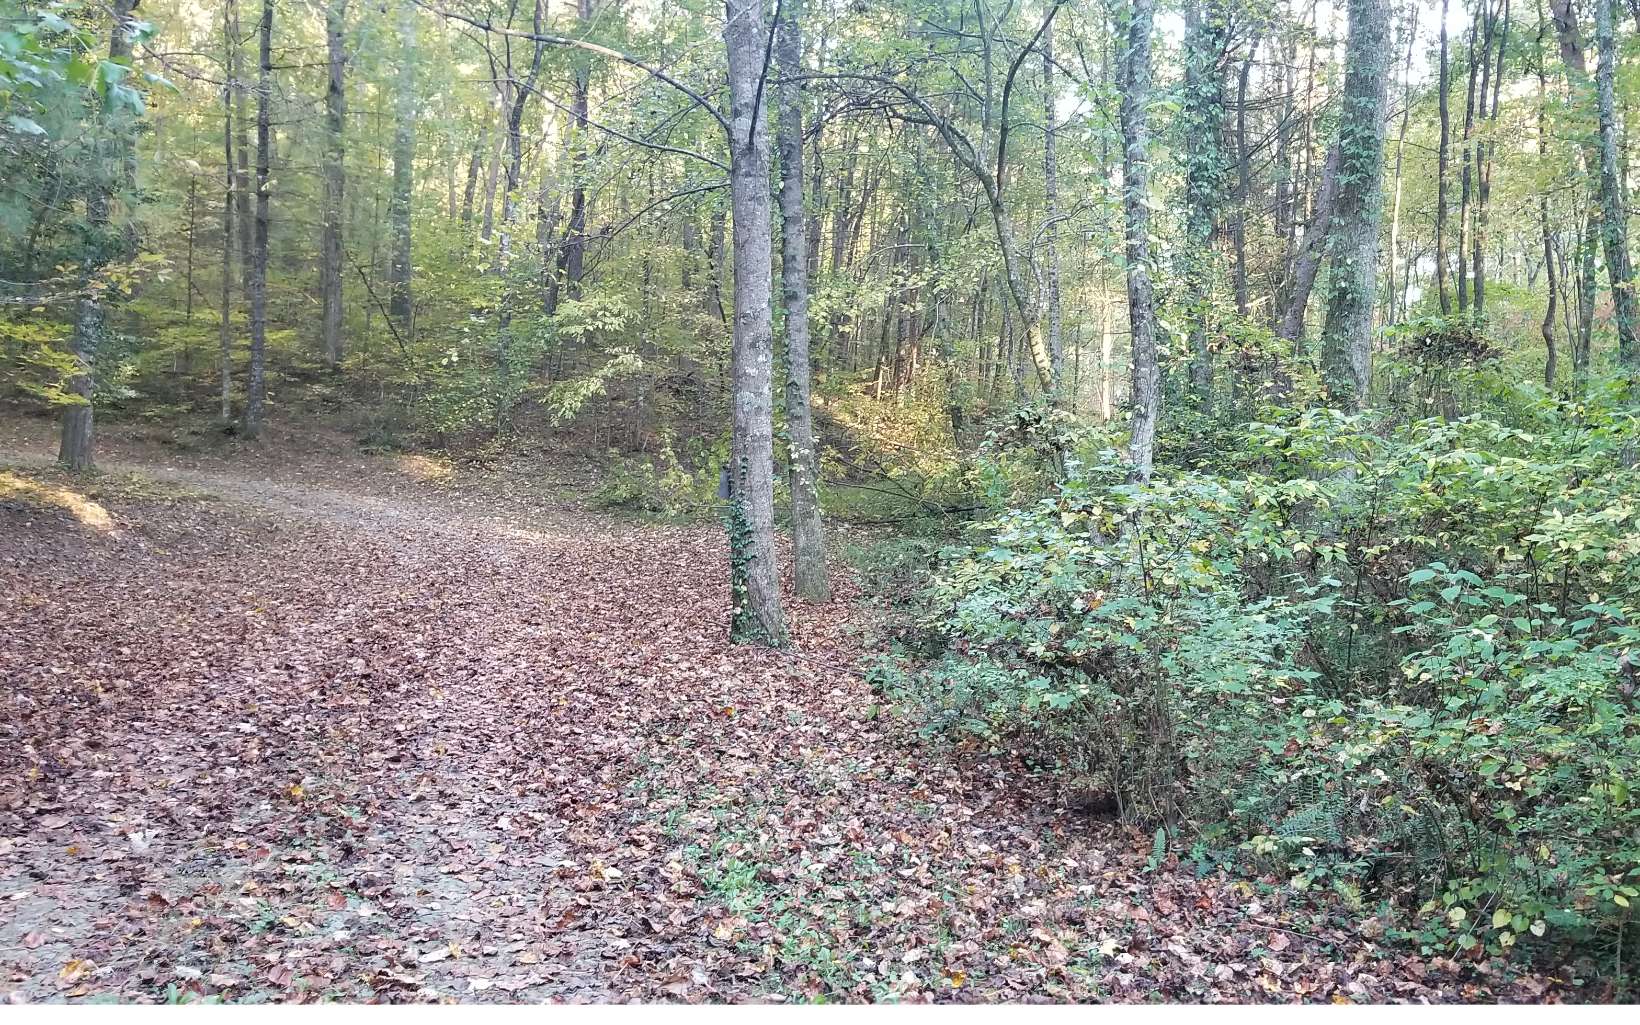 Just over 6 UNRESTRICTED acres in Gilmer County. Gorgeous wooded serene land with gentle slopes and plentiful building spots. Super private with a road bed already in place. A true must see! More photos coming soon!